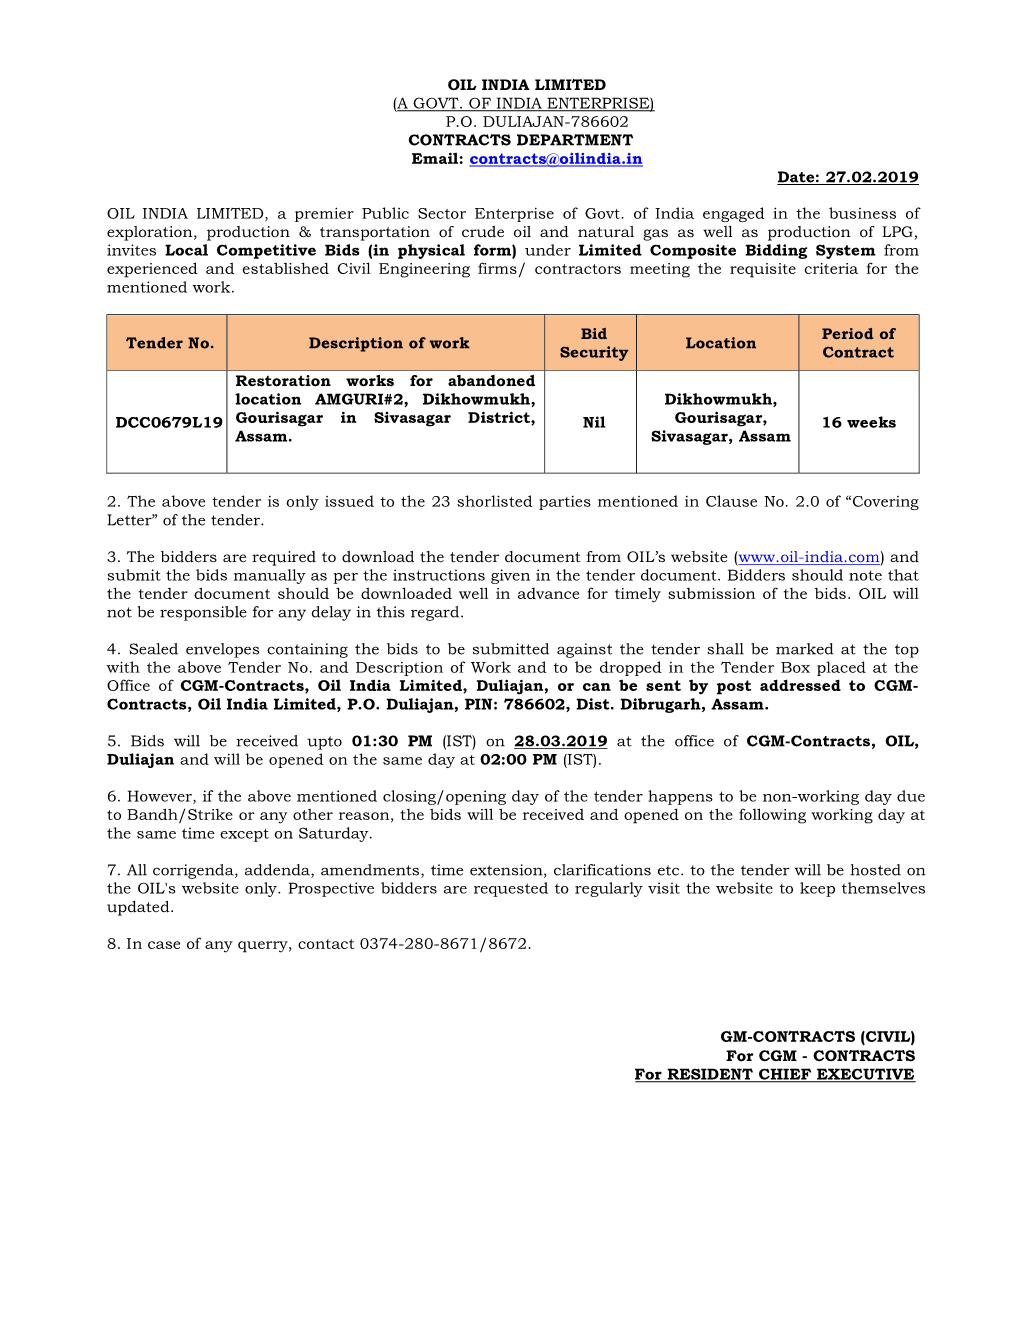 OIL INDIA LIMITED (A GOVT. of INDIA ENTERPRISE) P.O. DULIAJAN-786602 CONTRACTS DEPARTMENT Email: Contracts@Oilindia.In Date: 27.02.2019